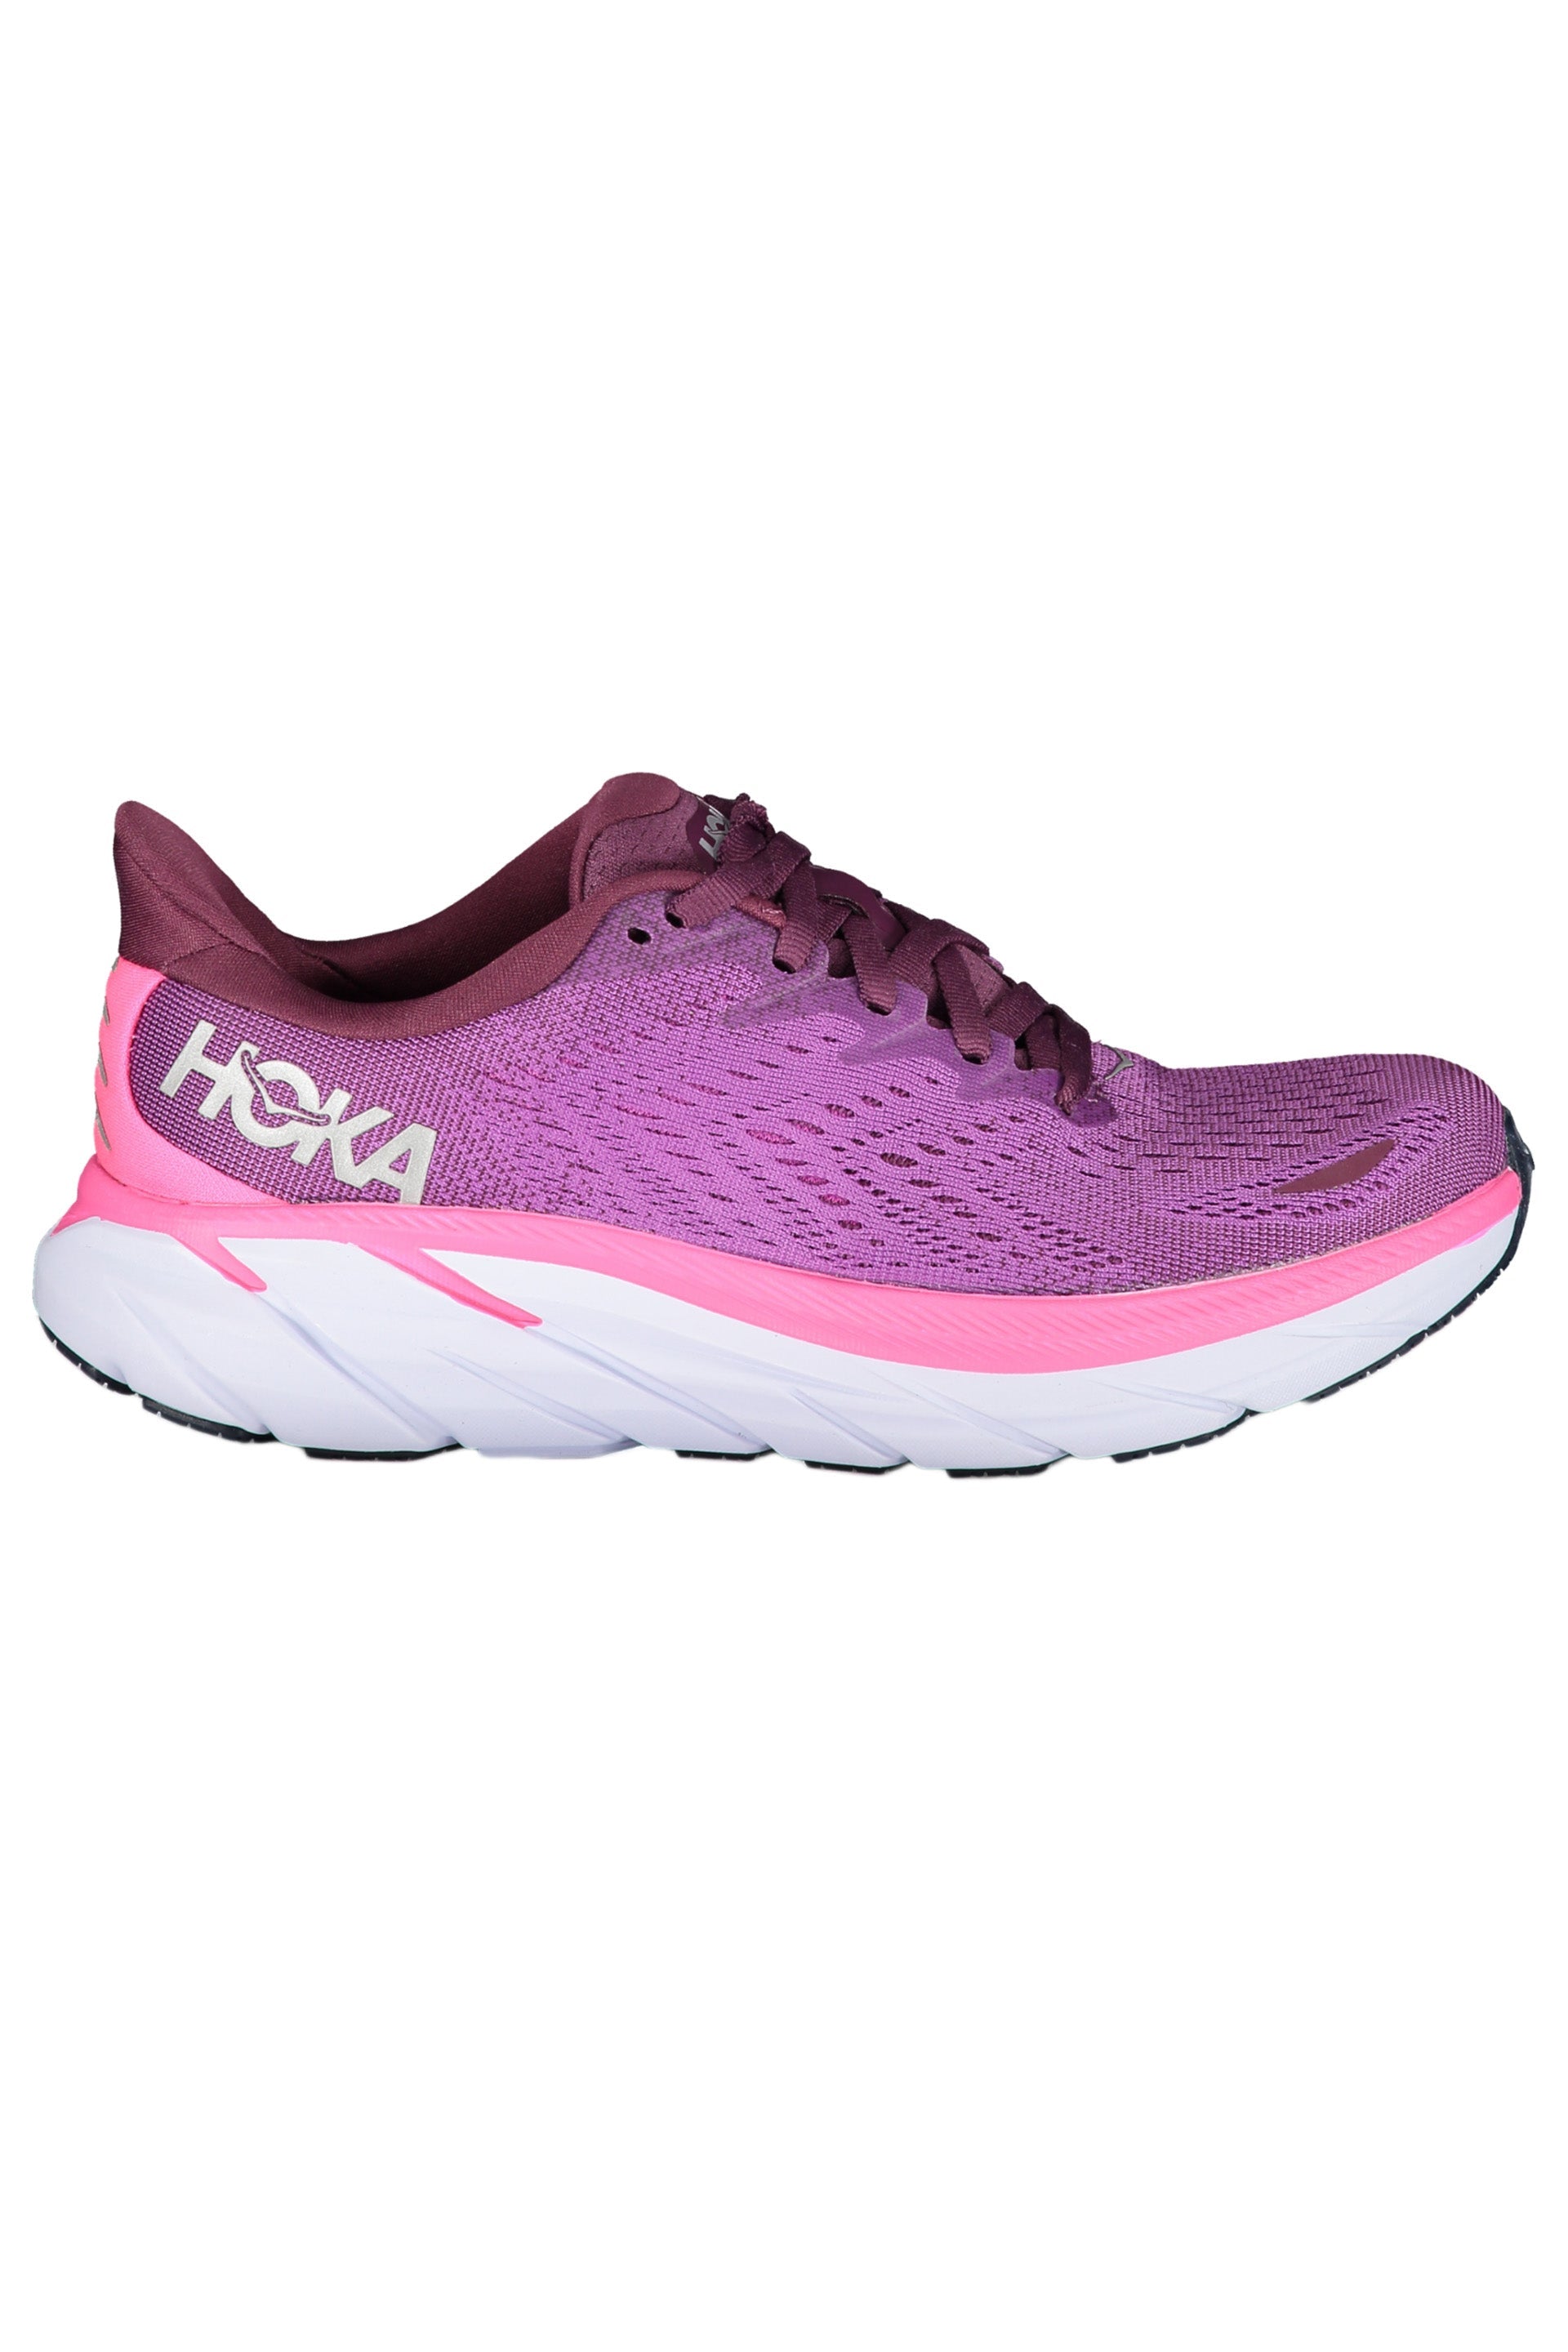 Low-top sneakers-Hoka One One-OUTLET-SALE-5.5-ARCHIVIST